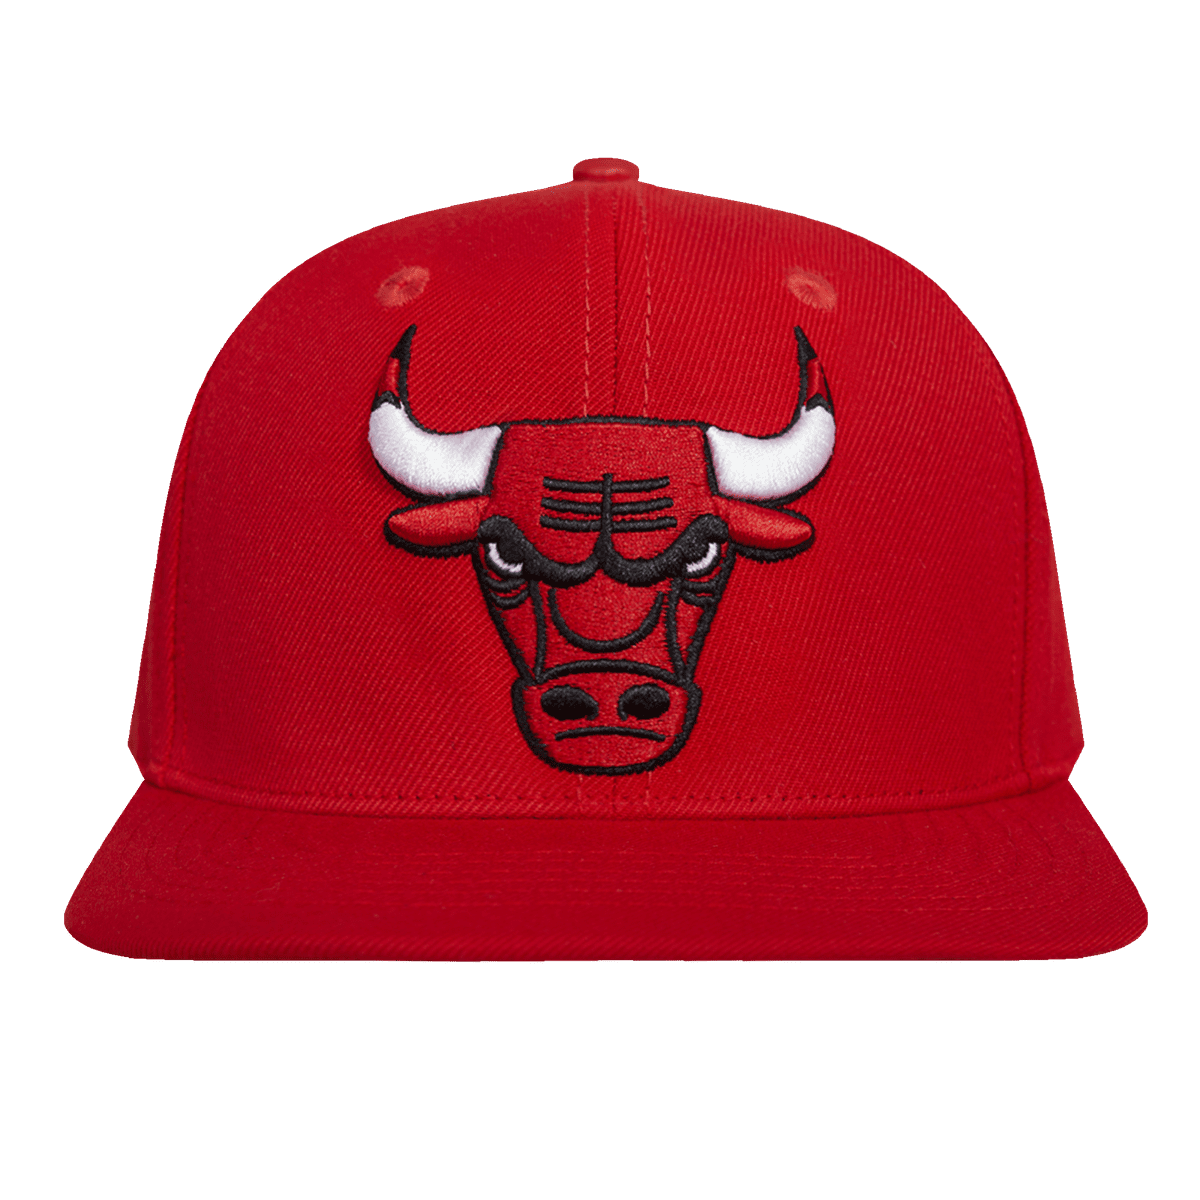  Mitchell & Ness Chicago Bulls Snapback Hat Adjustable Cap -  White/Black/Gold/Red/Royal/1993 NBA Finals : Sports & Outdoors